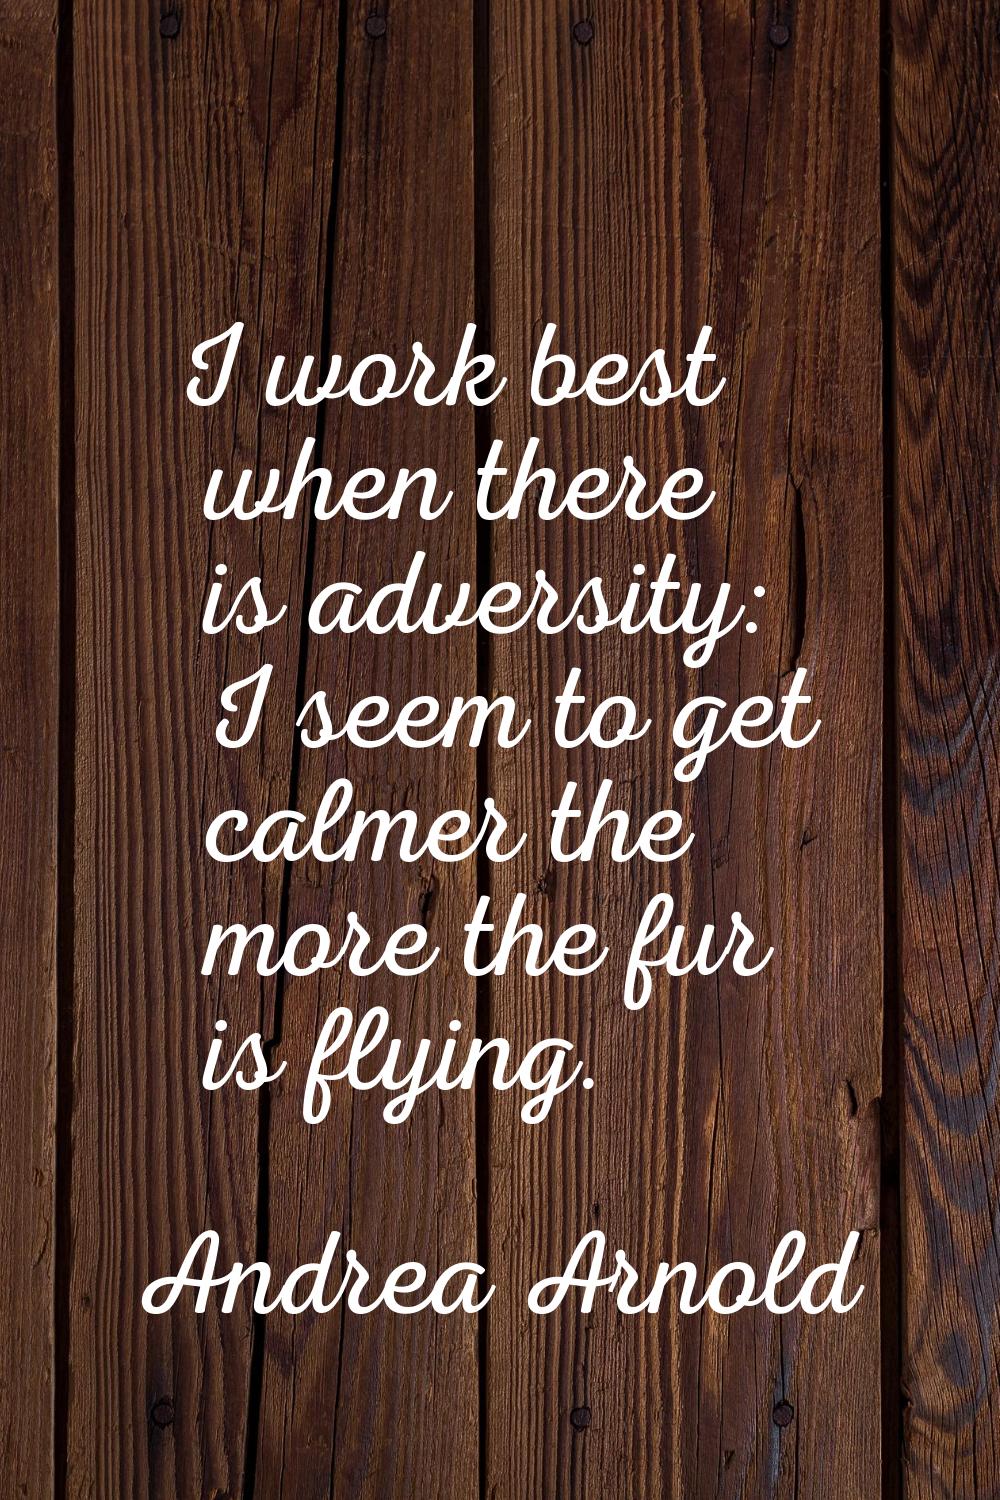 I work best when there is adversity: I seem to get calmer the more the fur is flying.